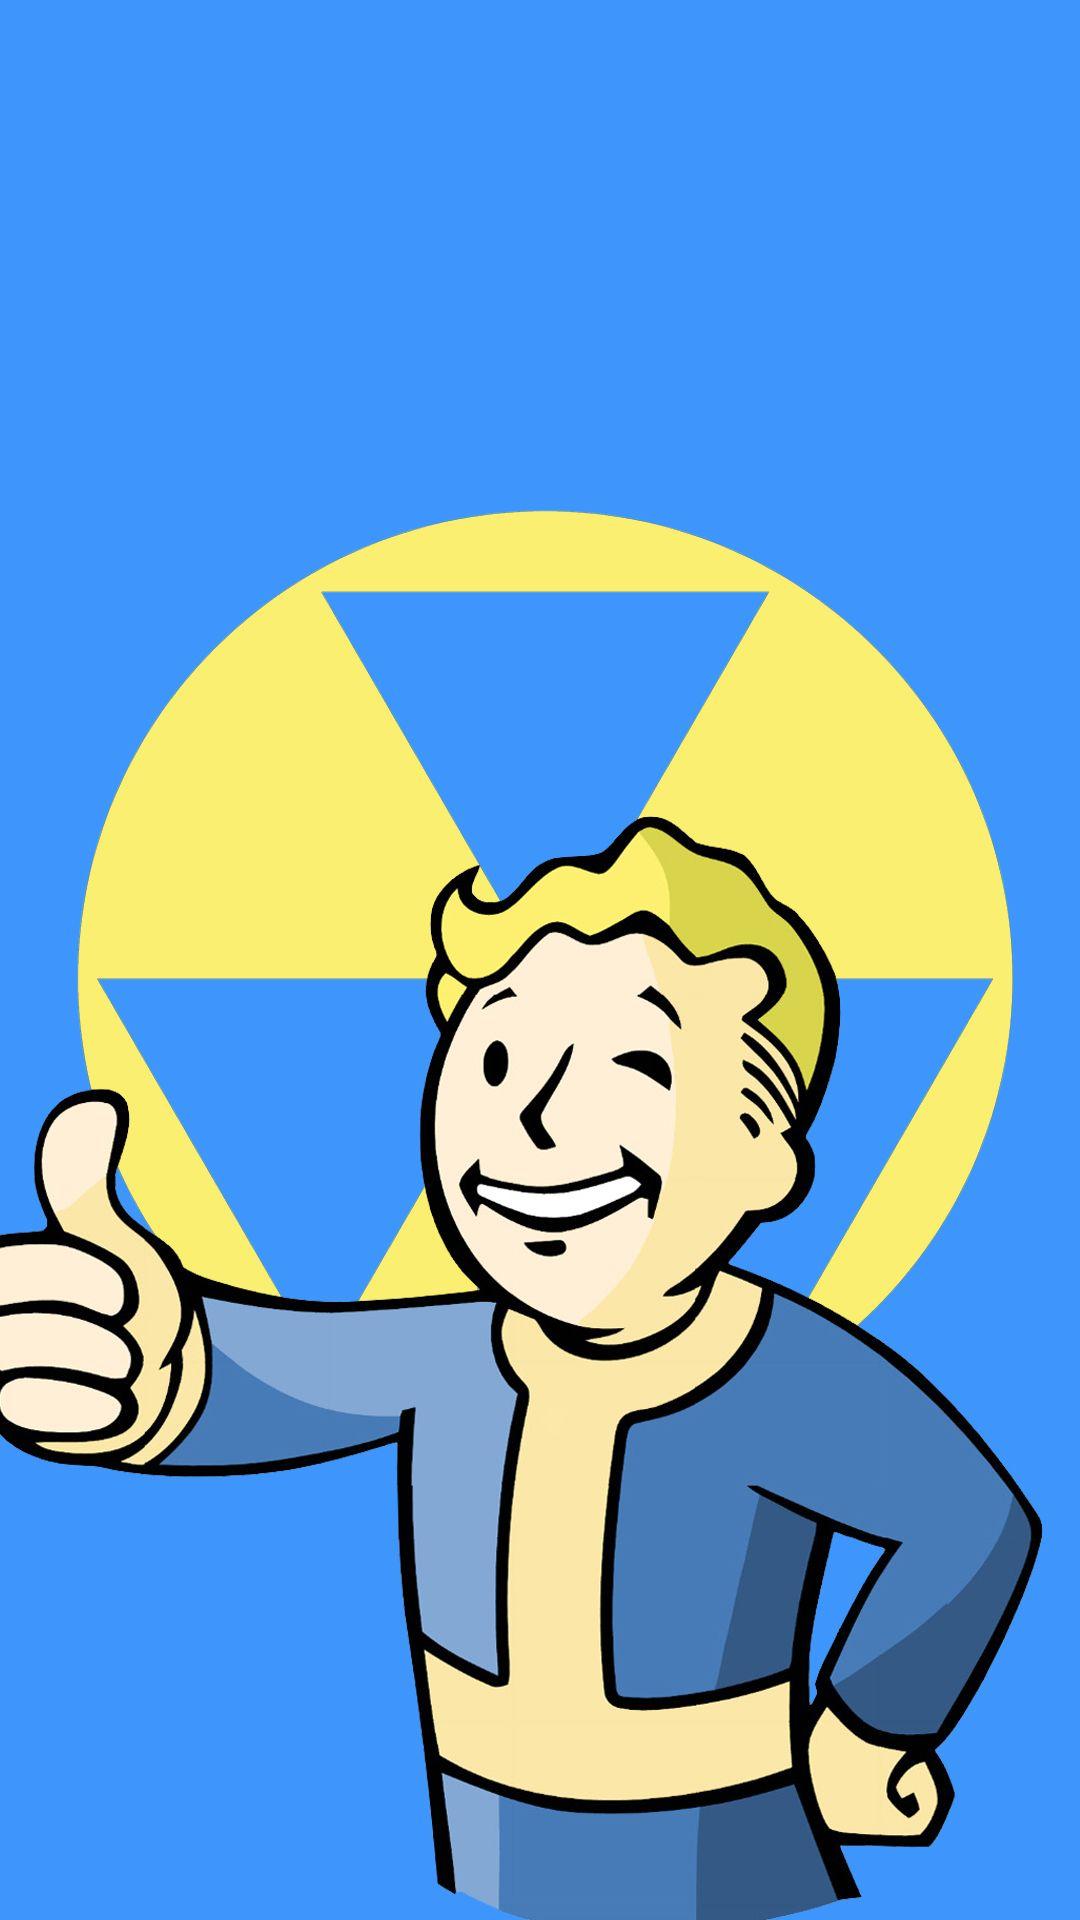 Made a wallpaper based on Fallout Shelter